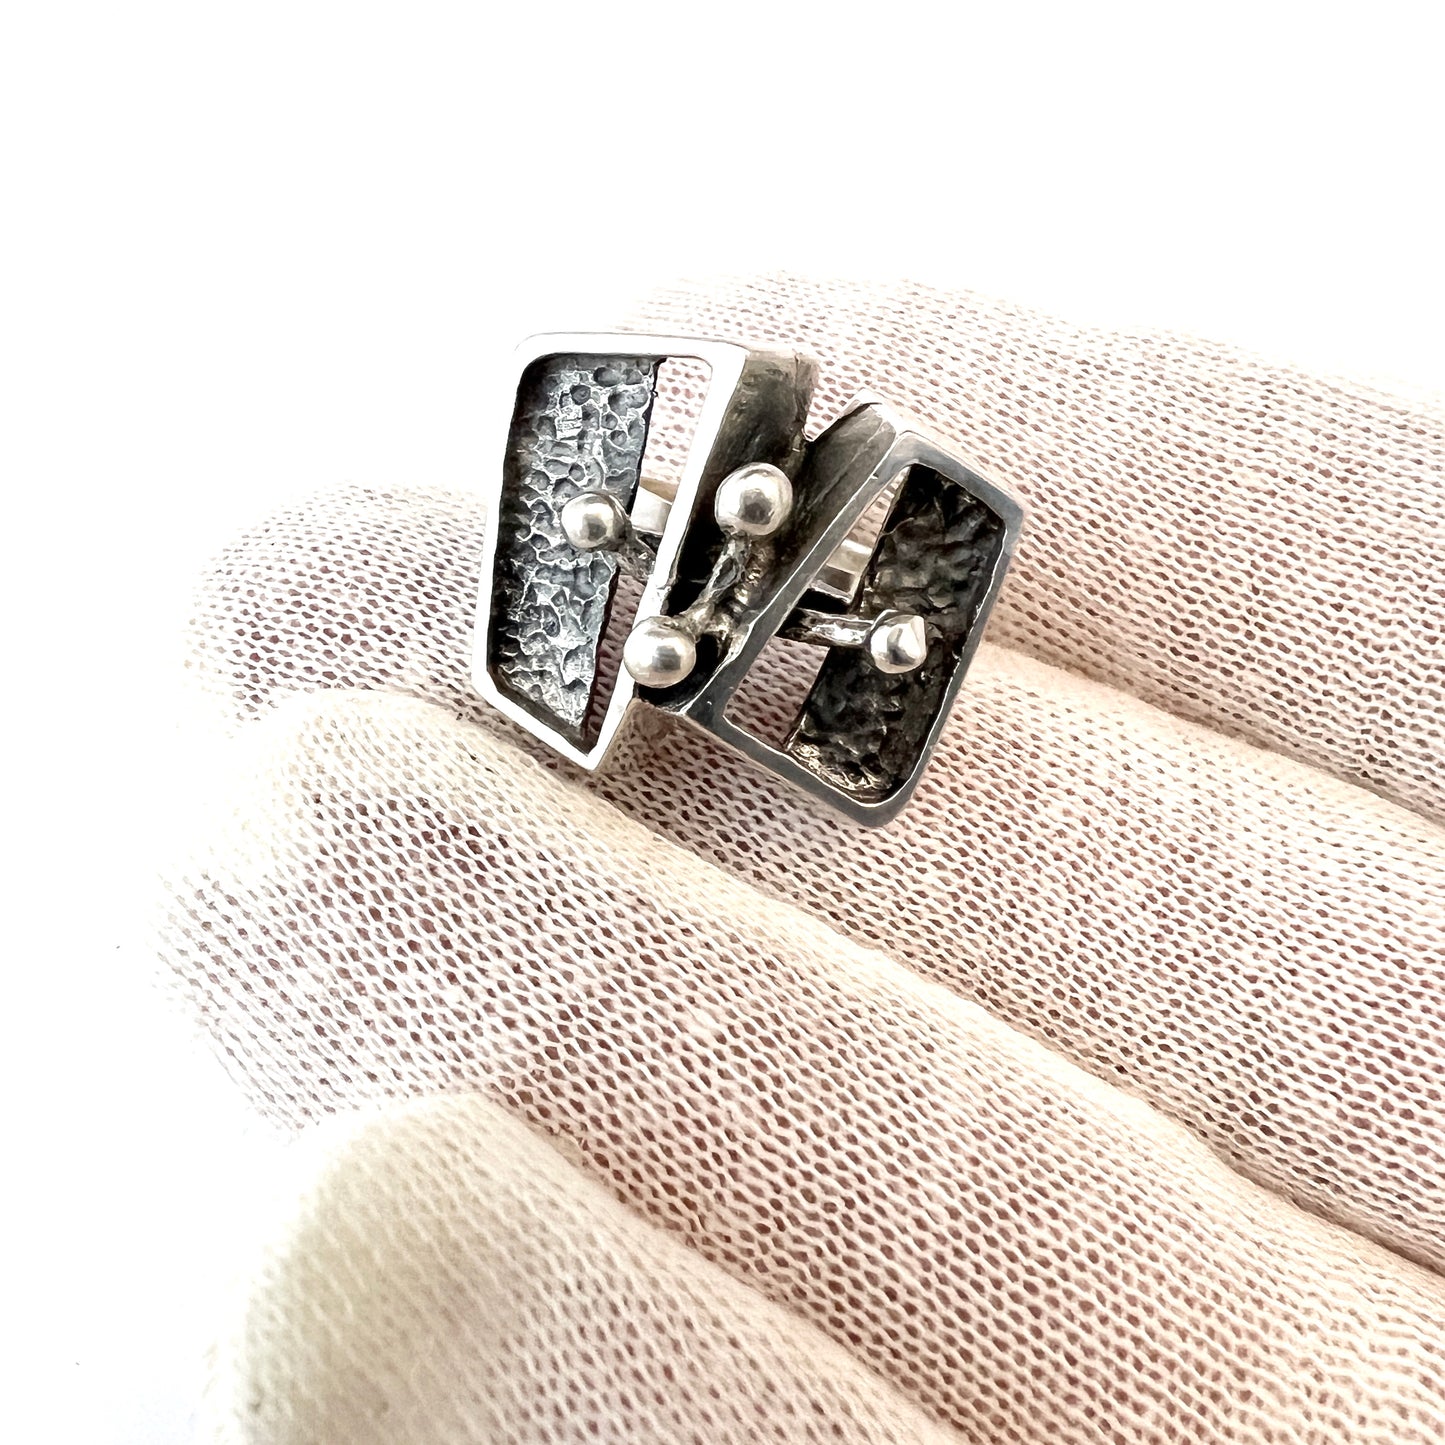 Alpo Tammi, Finland 1970s. Vintage Modernist Solid Silver Pinky Ring.